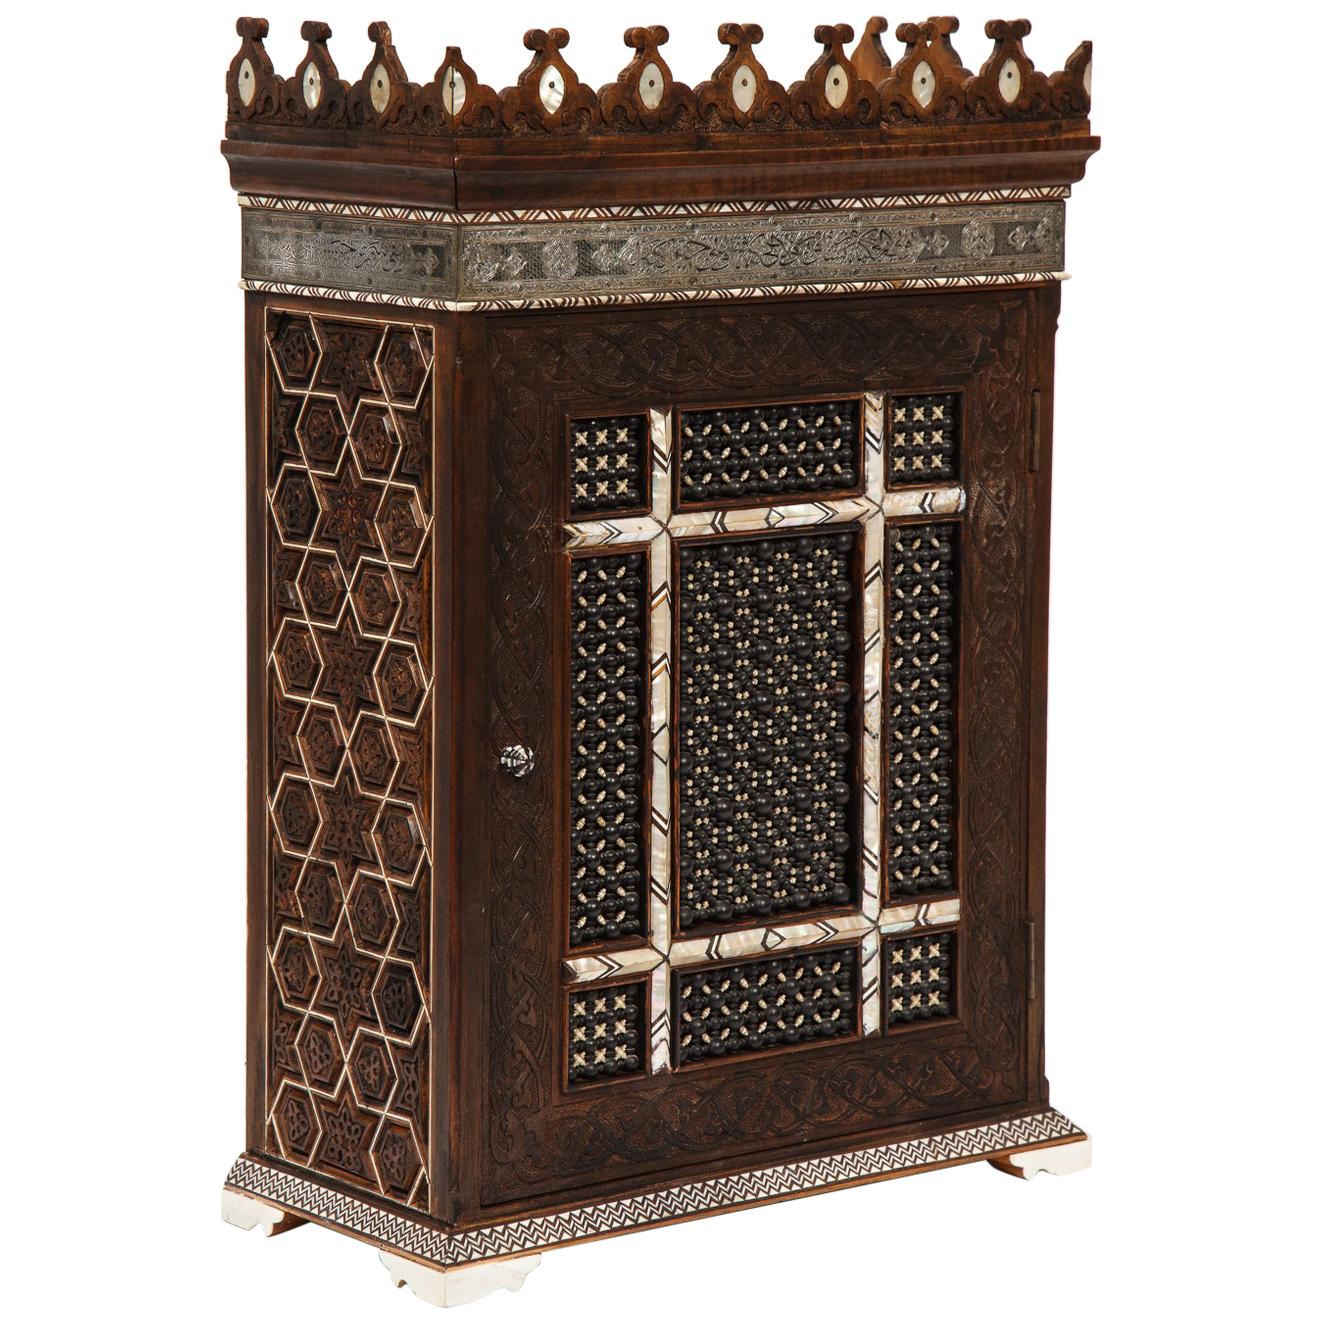 "Alhambra Islamic" Silver, Mother of Pearl, and Bone Inlaid Wall Hanging Cabinet